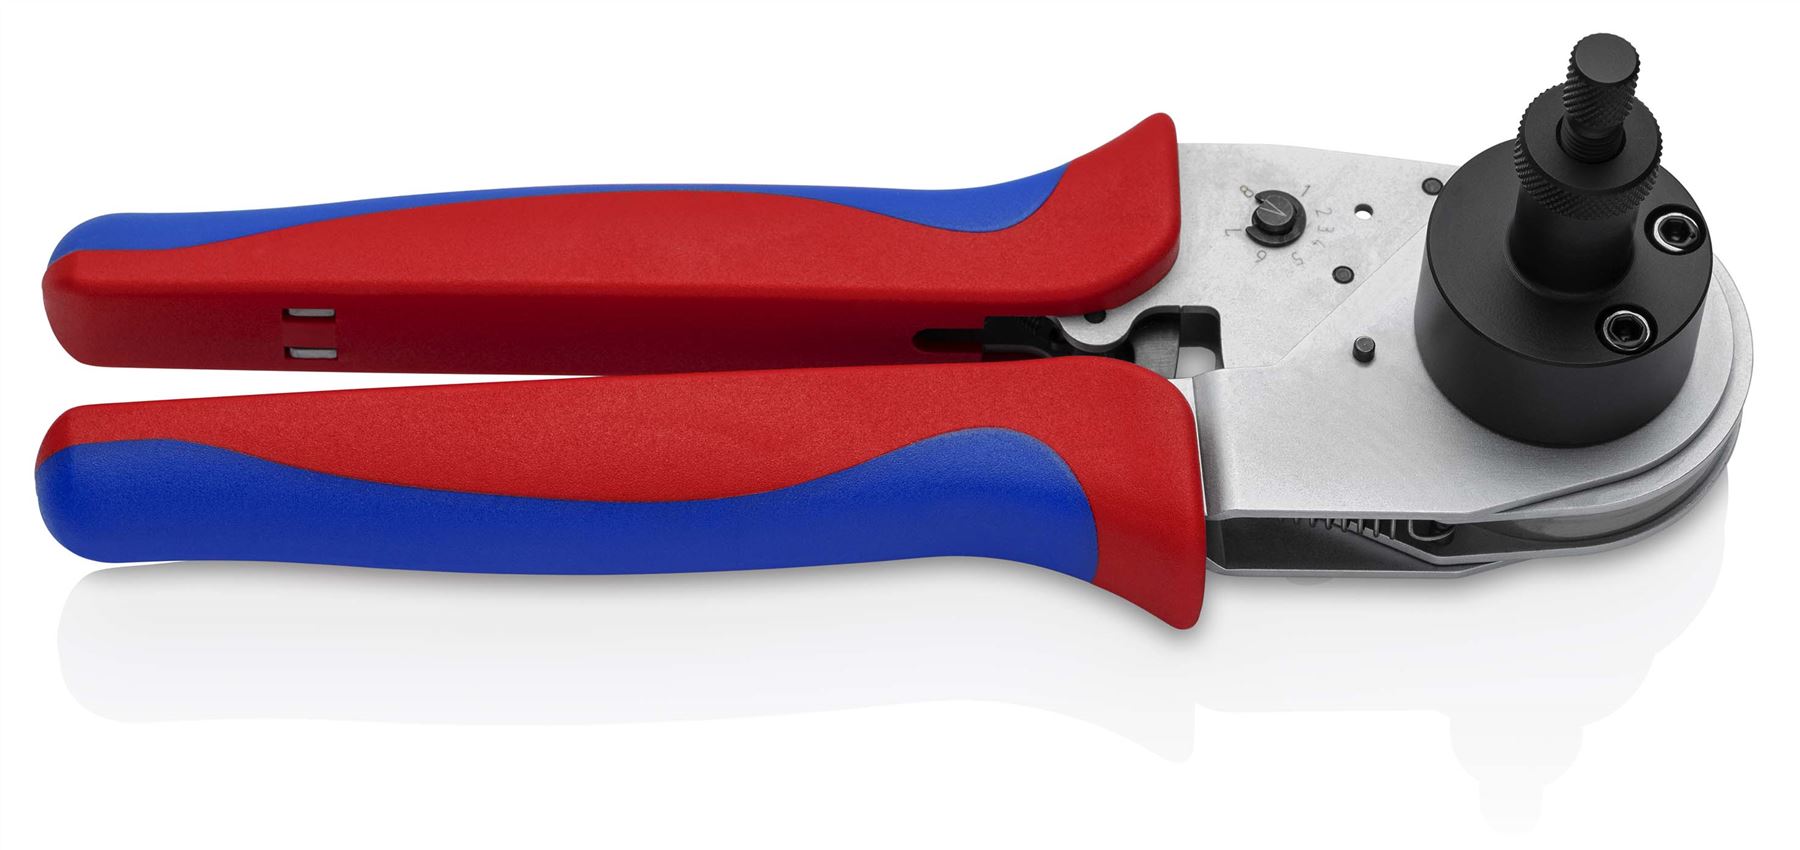 Knipex Four Mandrel Crimping Pliers for DT Contacts Multi Component Grips 97 52 67 DT